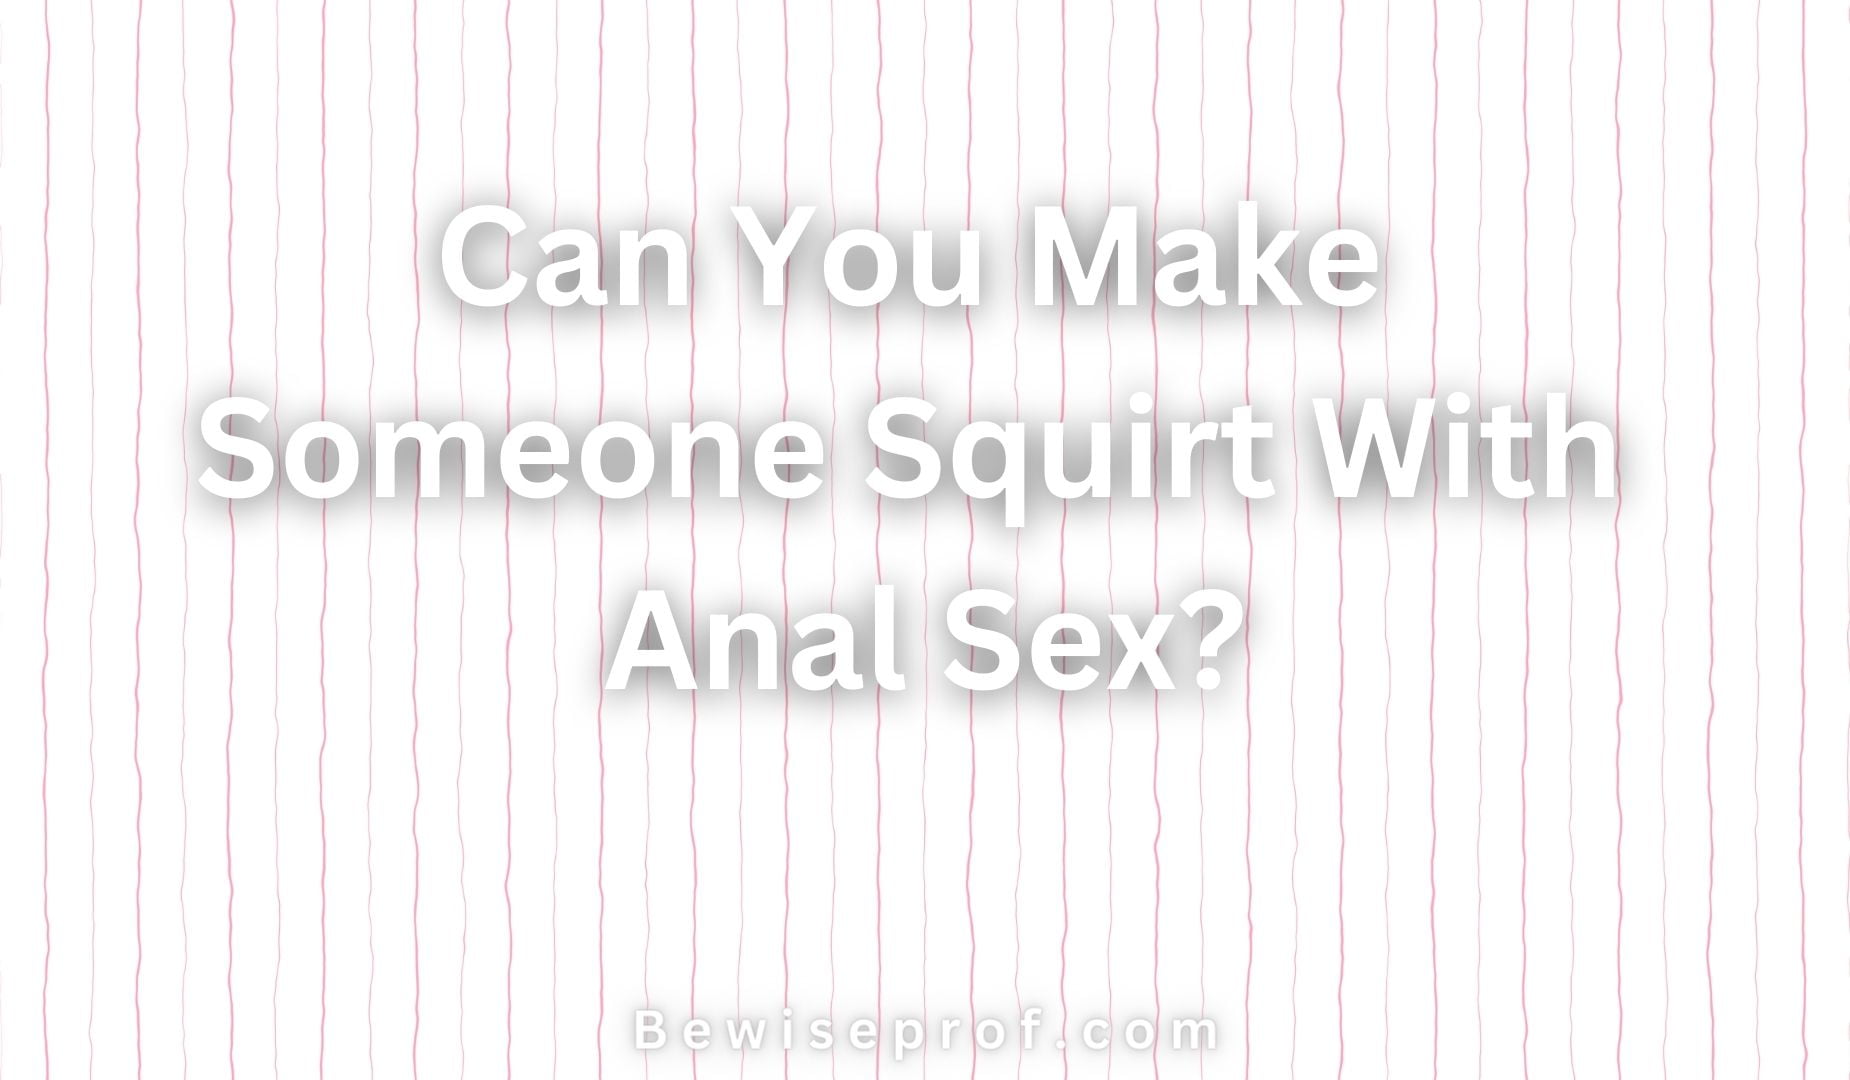 Can You Make Someone Squirt With Anal Sex?